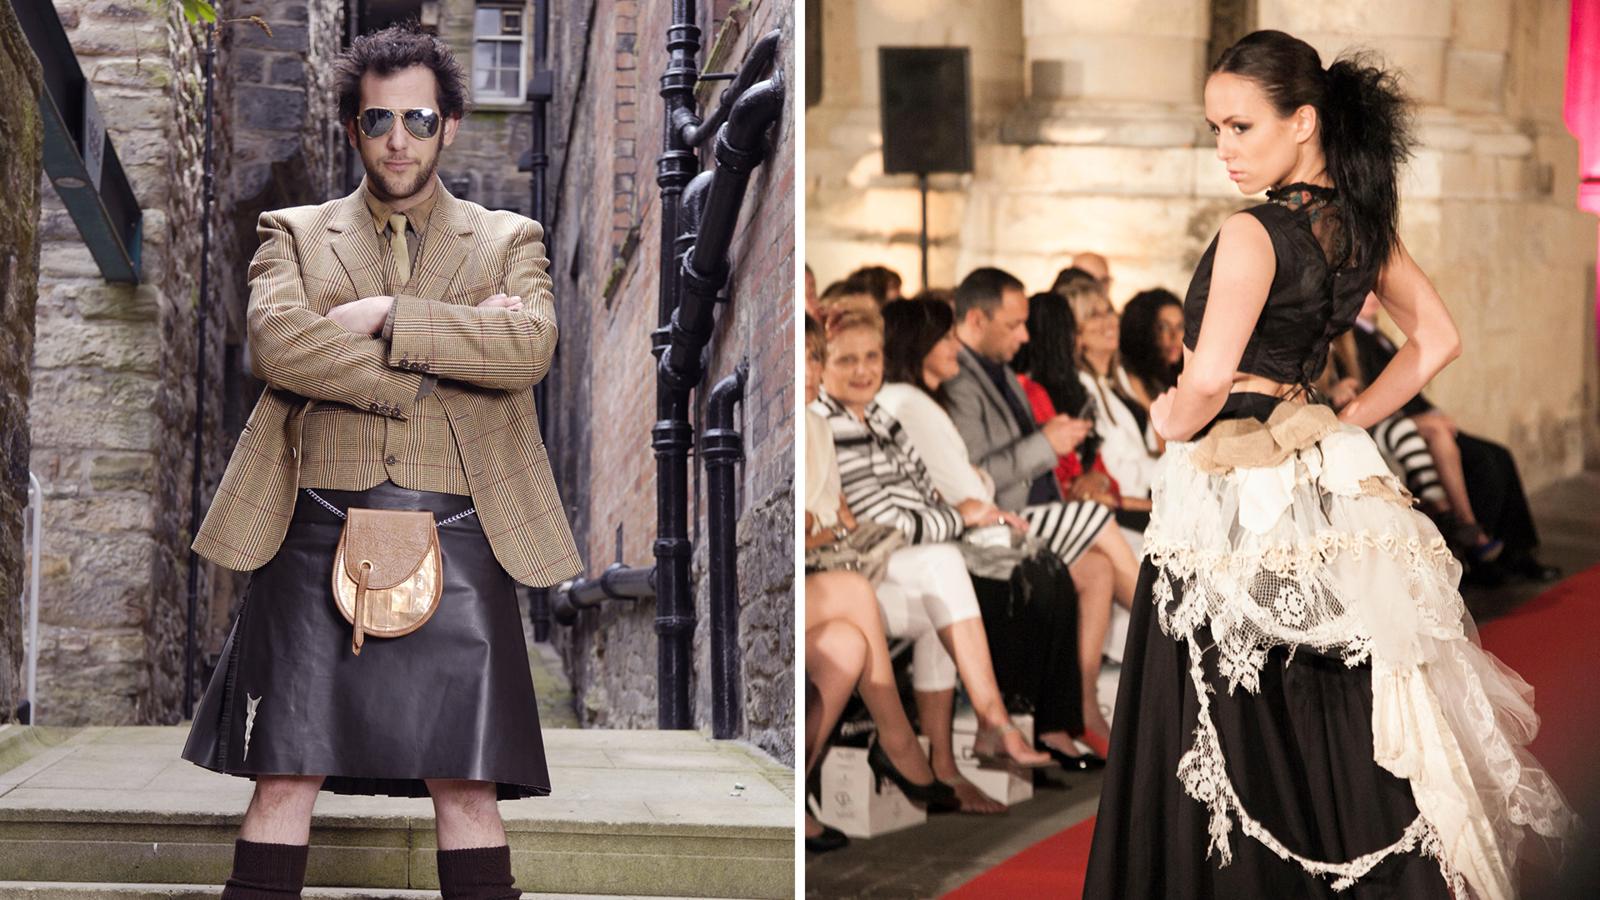 At left, Howie Nicholsby of 21st Century Kilts models his own designs; at right, Judy R Clark’s designs incorporate elements like Scottish lace and tartan (Credit: Alamy)